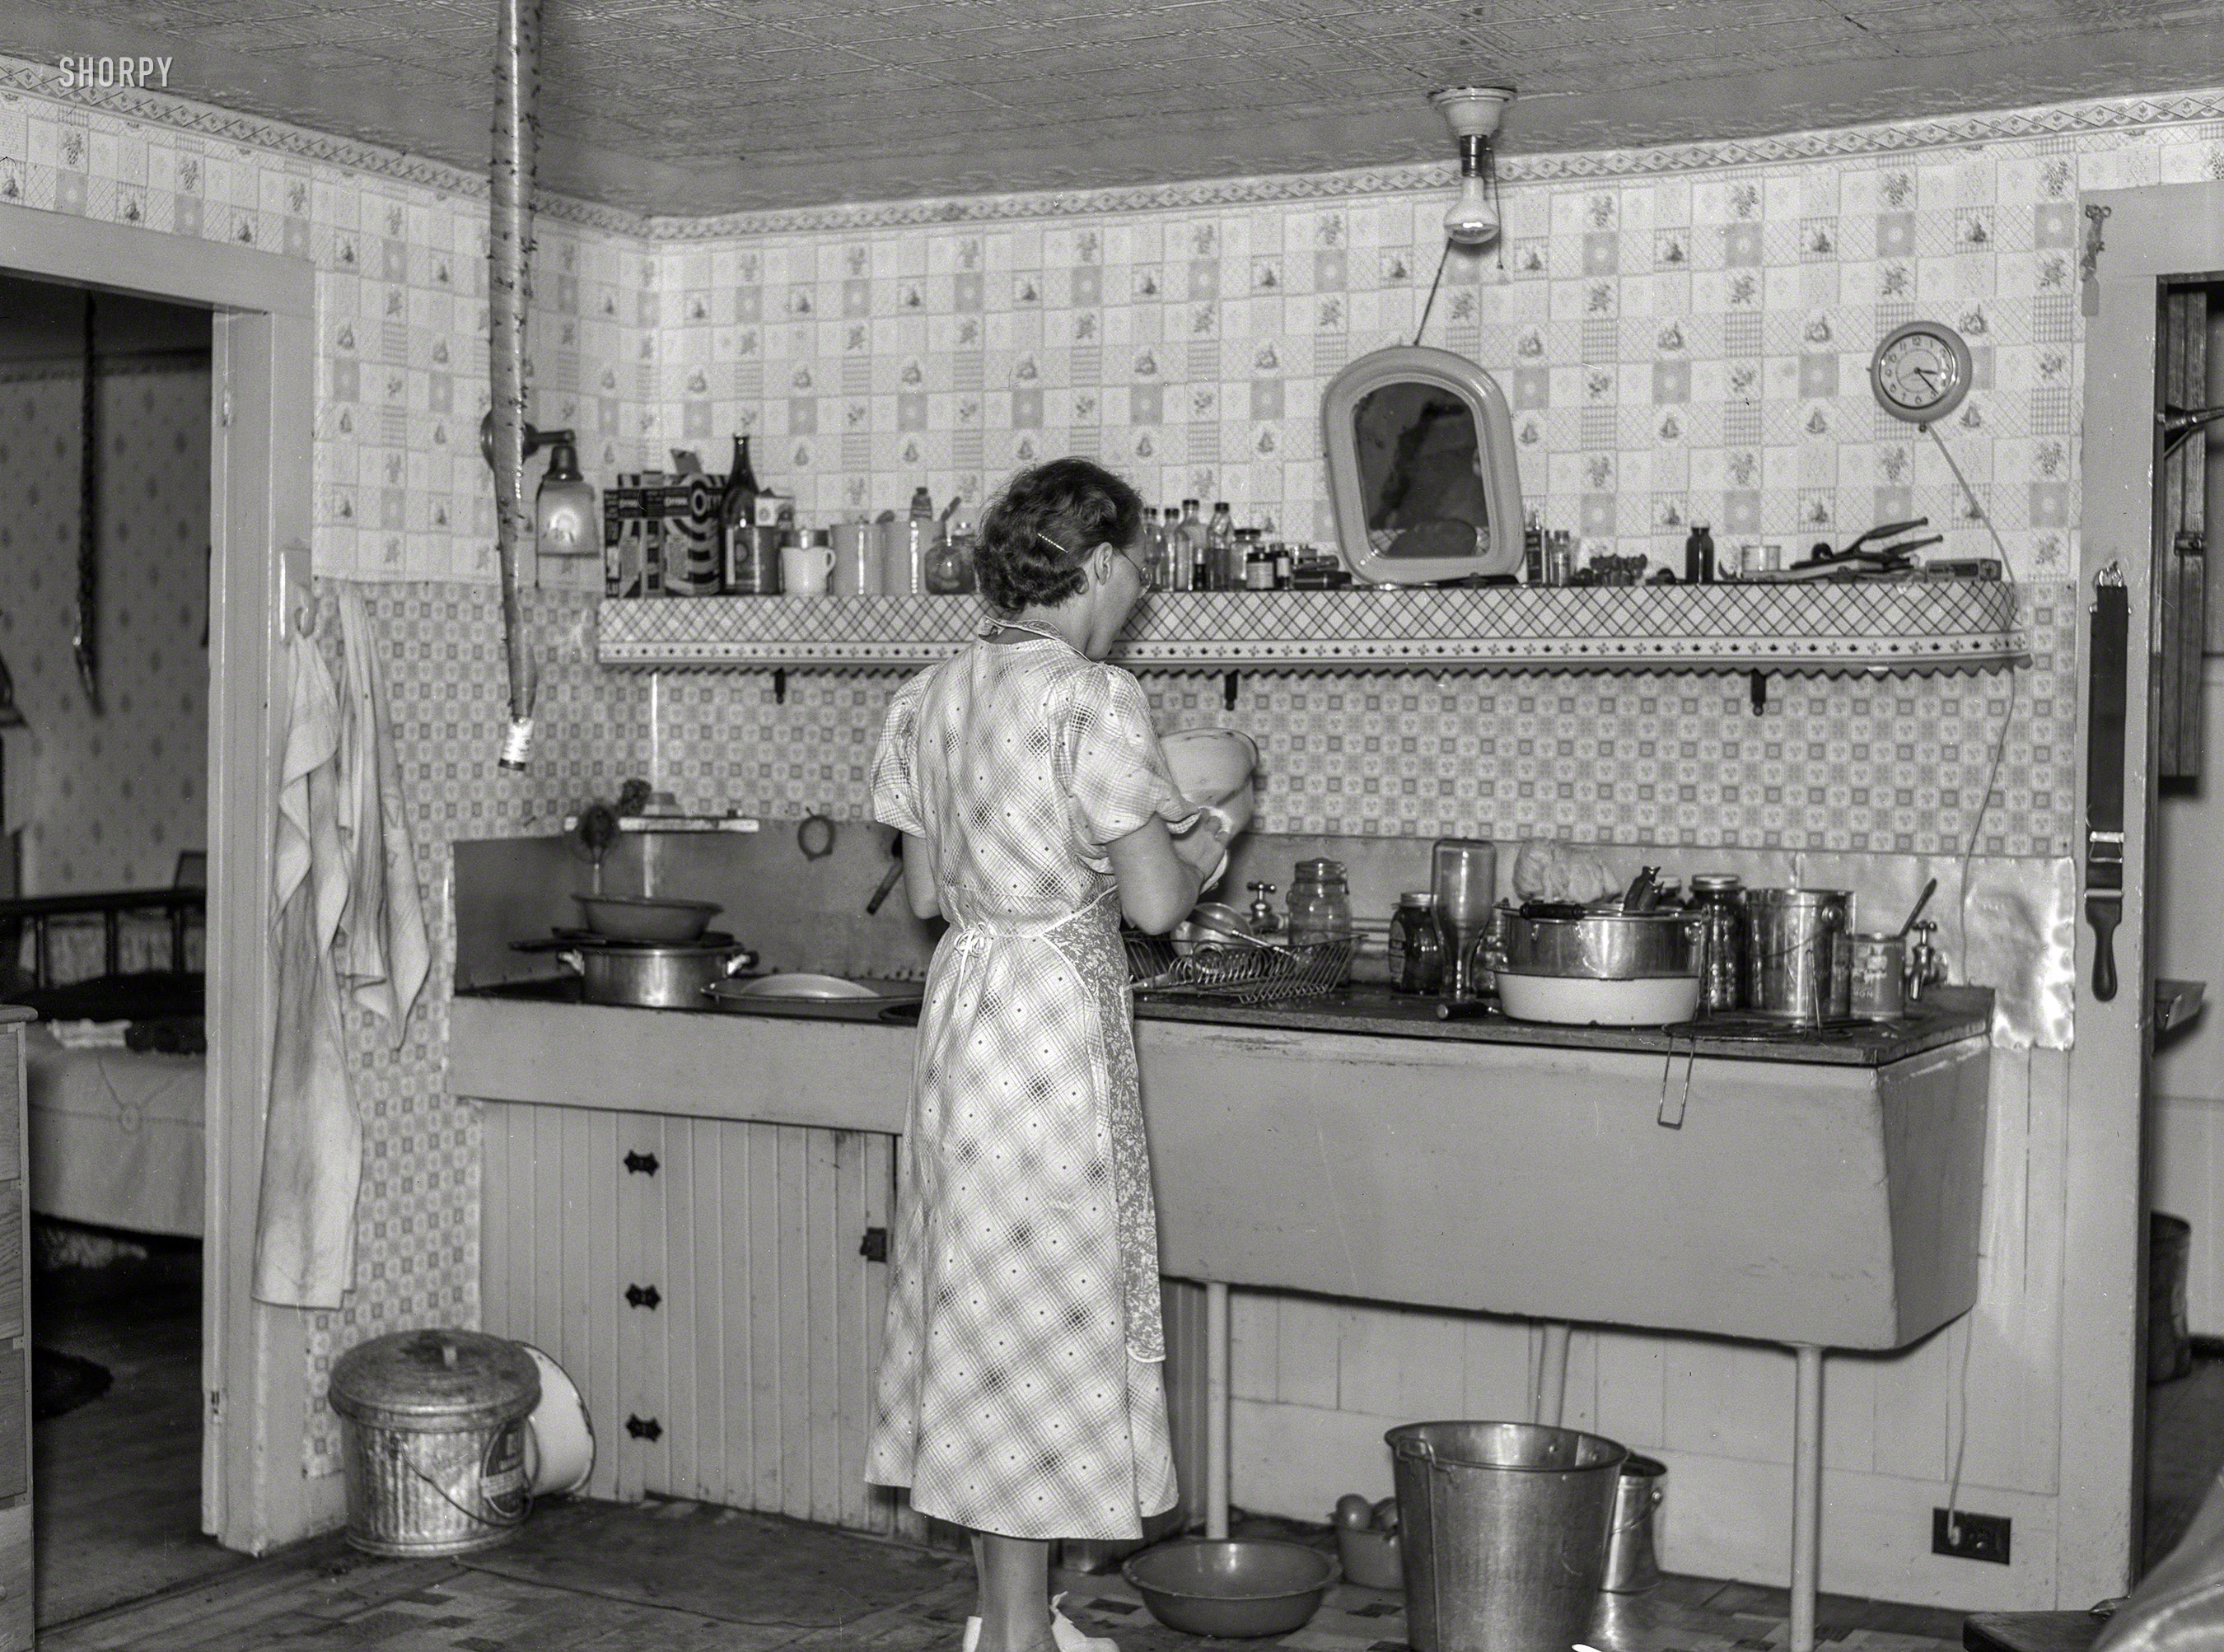 September 1937. "Hired girl washing dishes on the McNally farm. Kirby, Vermont." The kitchen last seen here. Medium format negative by Arthur Rothstein for the Farm Security Administration. View full size.